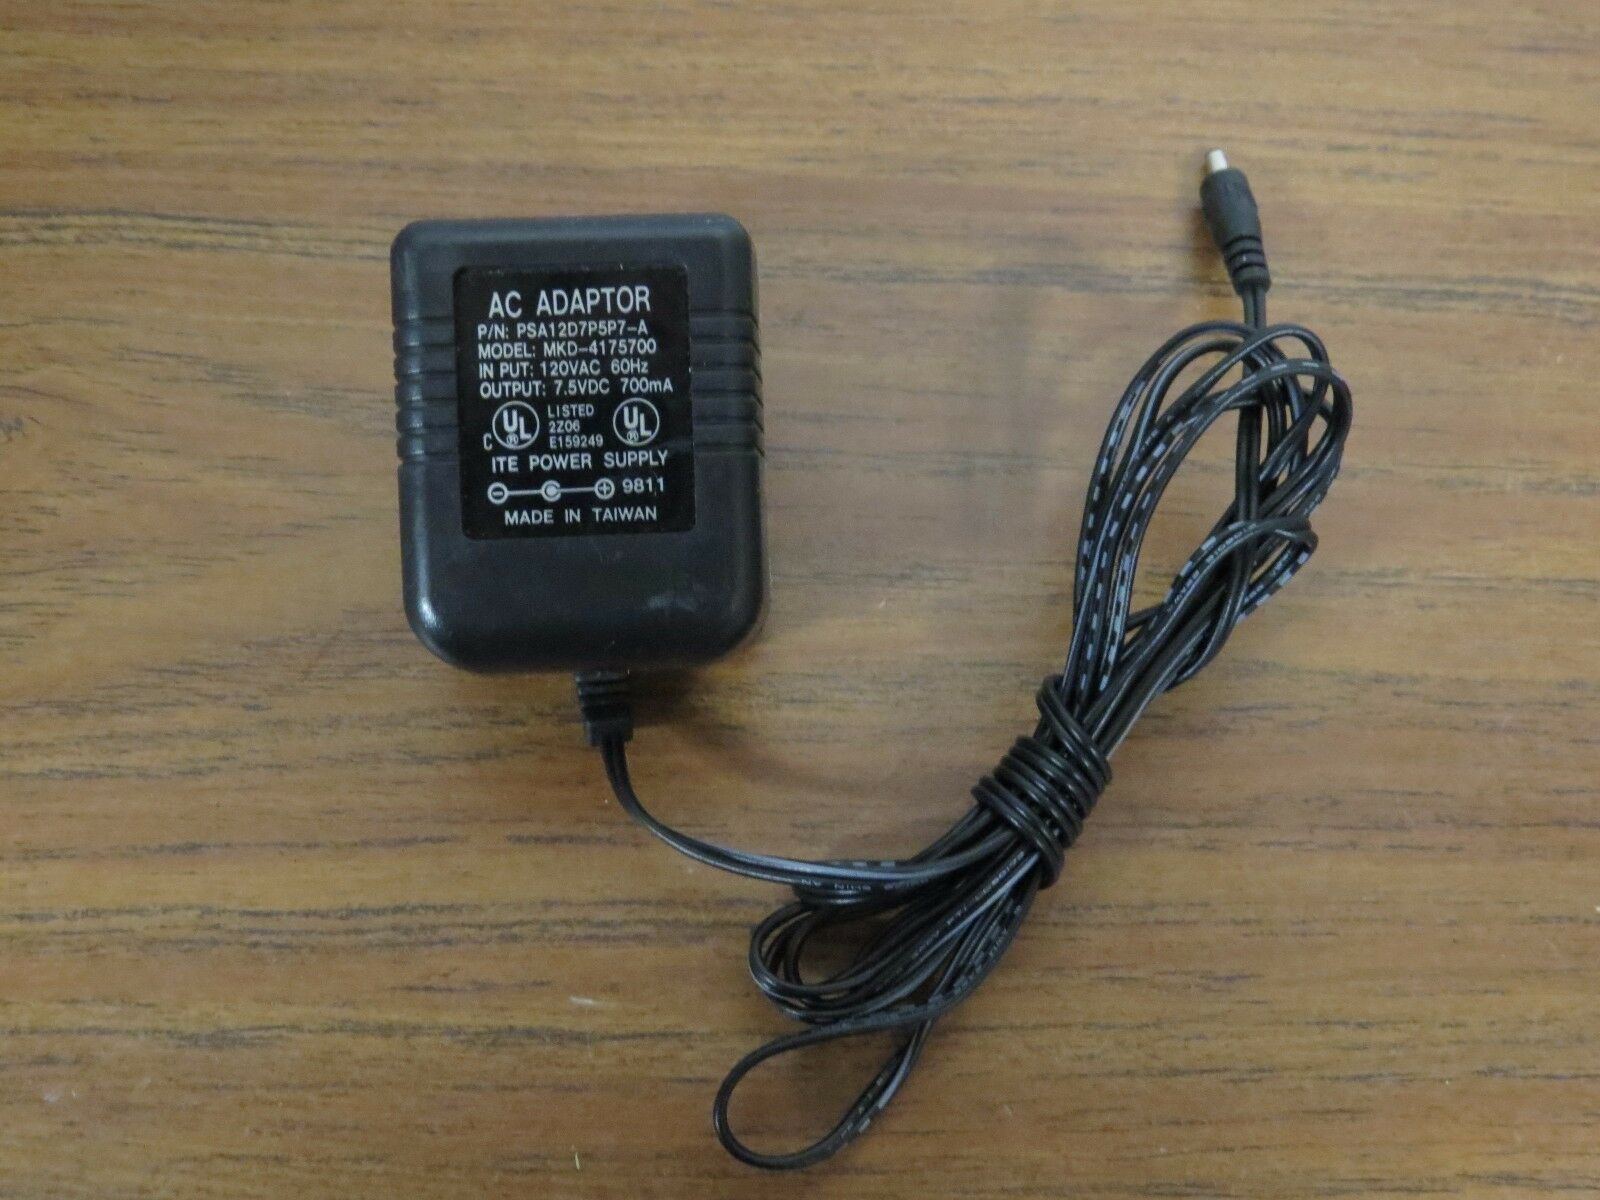 ITE 7.5V,700mA AC/DC POWER SUPPLY ADAPTER CORD MKD-4175700 Brand: Unbranded/Ge - Click Image to Close